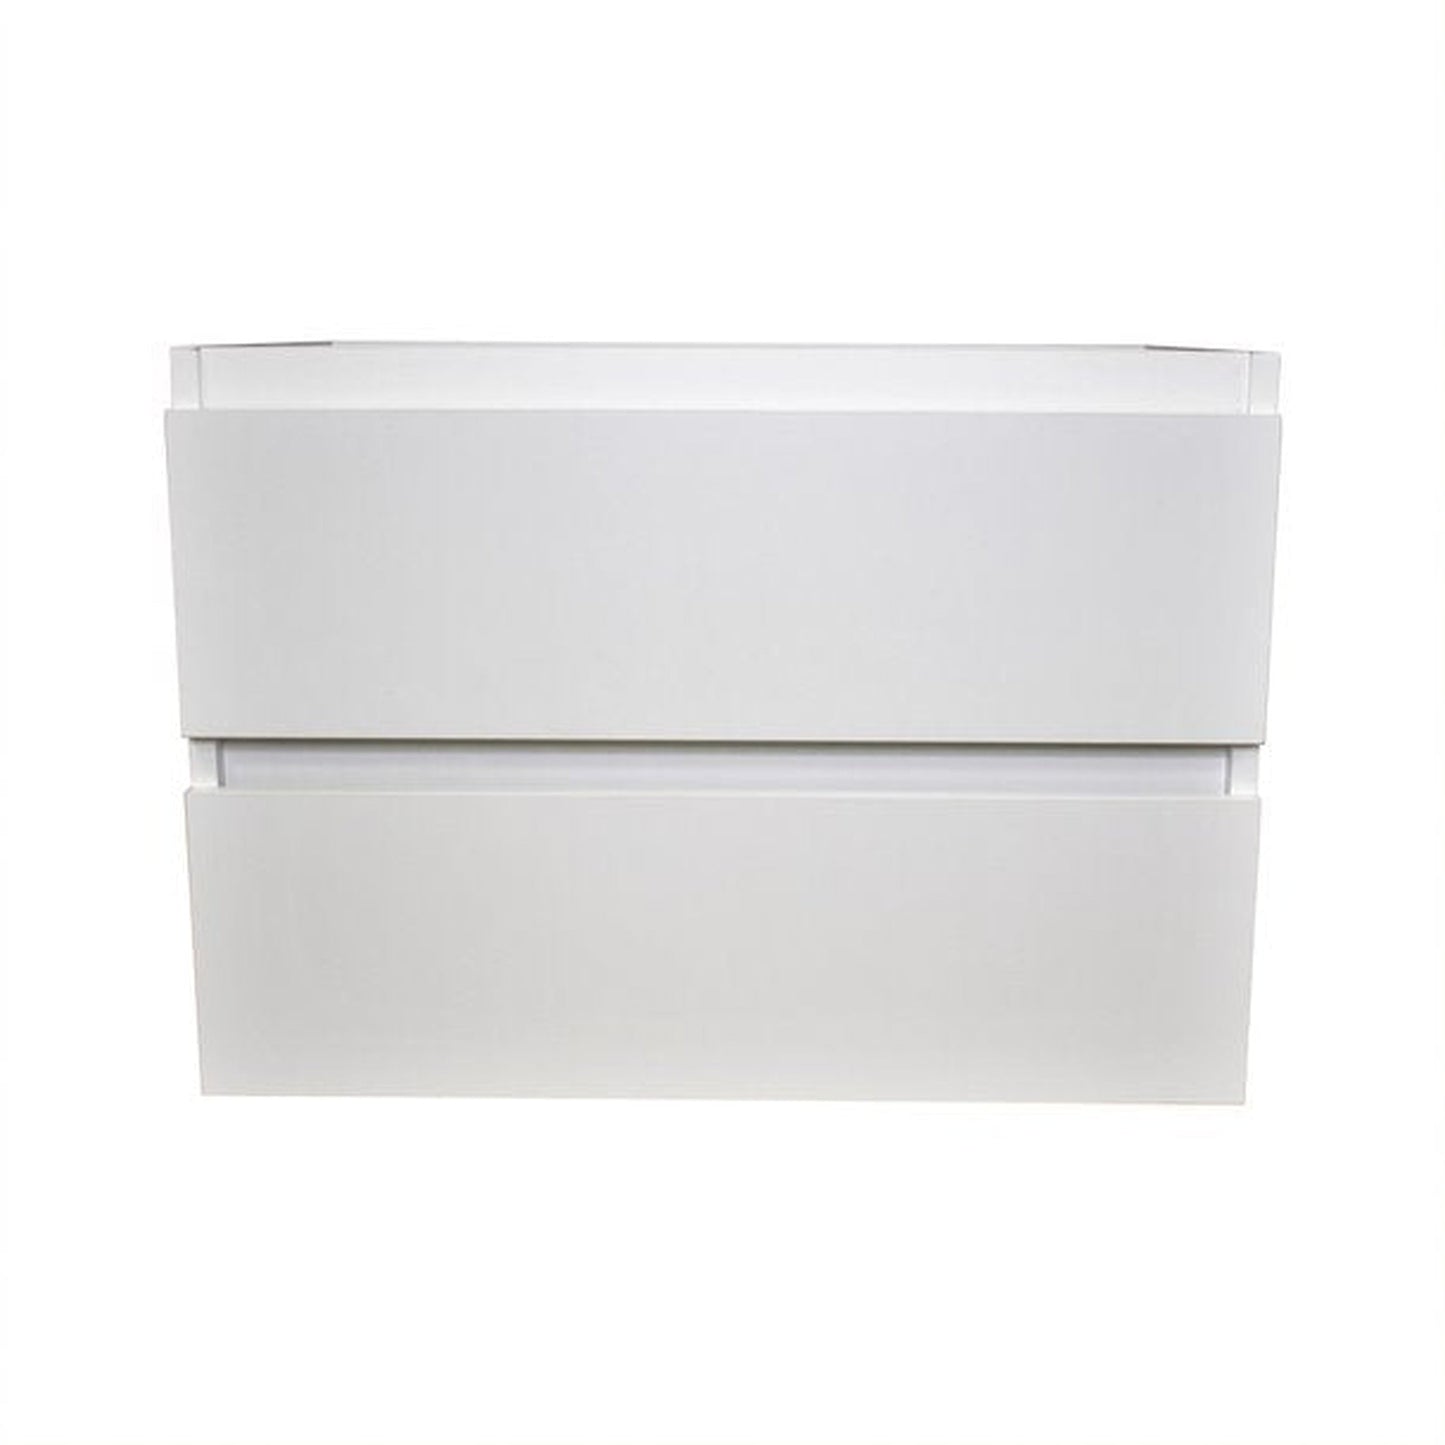 Volpa USA Salt 30" x 18" White Wall-Mounted Floating Bathroom Vanity Cabinet with Drawers